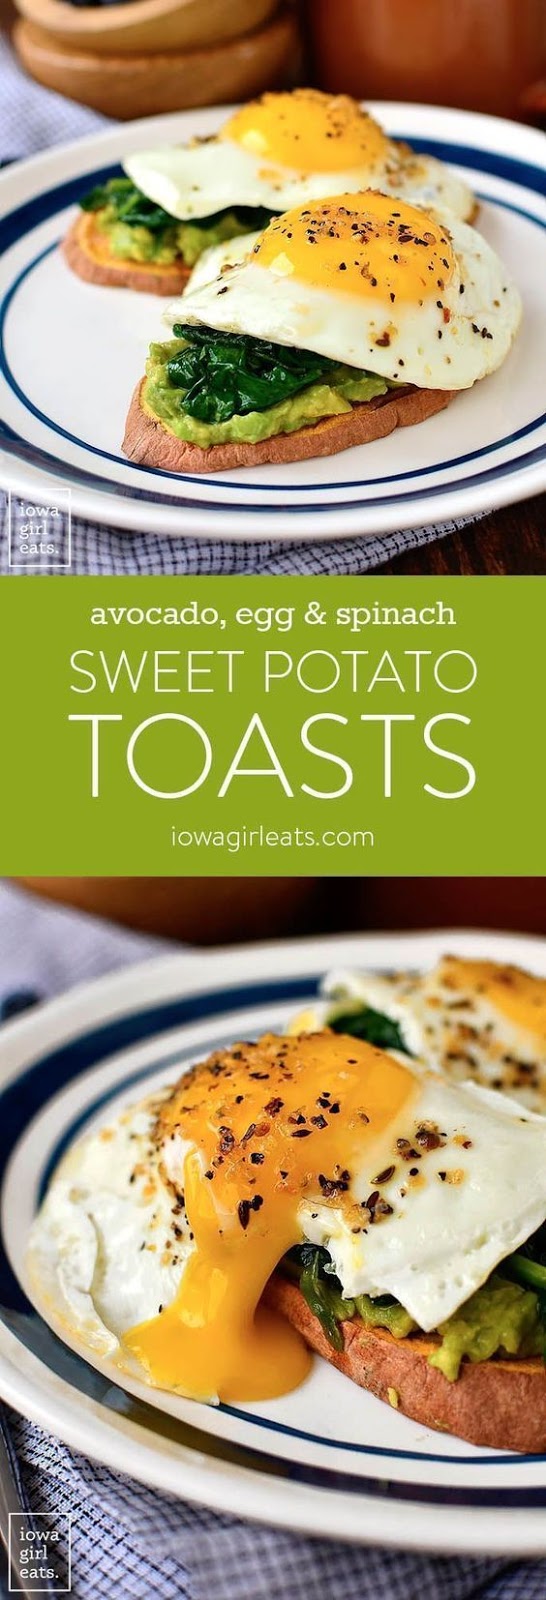 Get your day started with Avocado, Egg and Spinach Sweet Potato Toasts! This healthy, gluten-free breakfast recipe packs a healthy punch of protein, vitamins, and minerals. | 